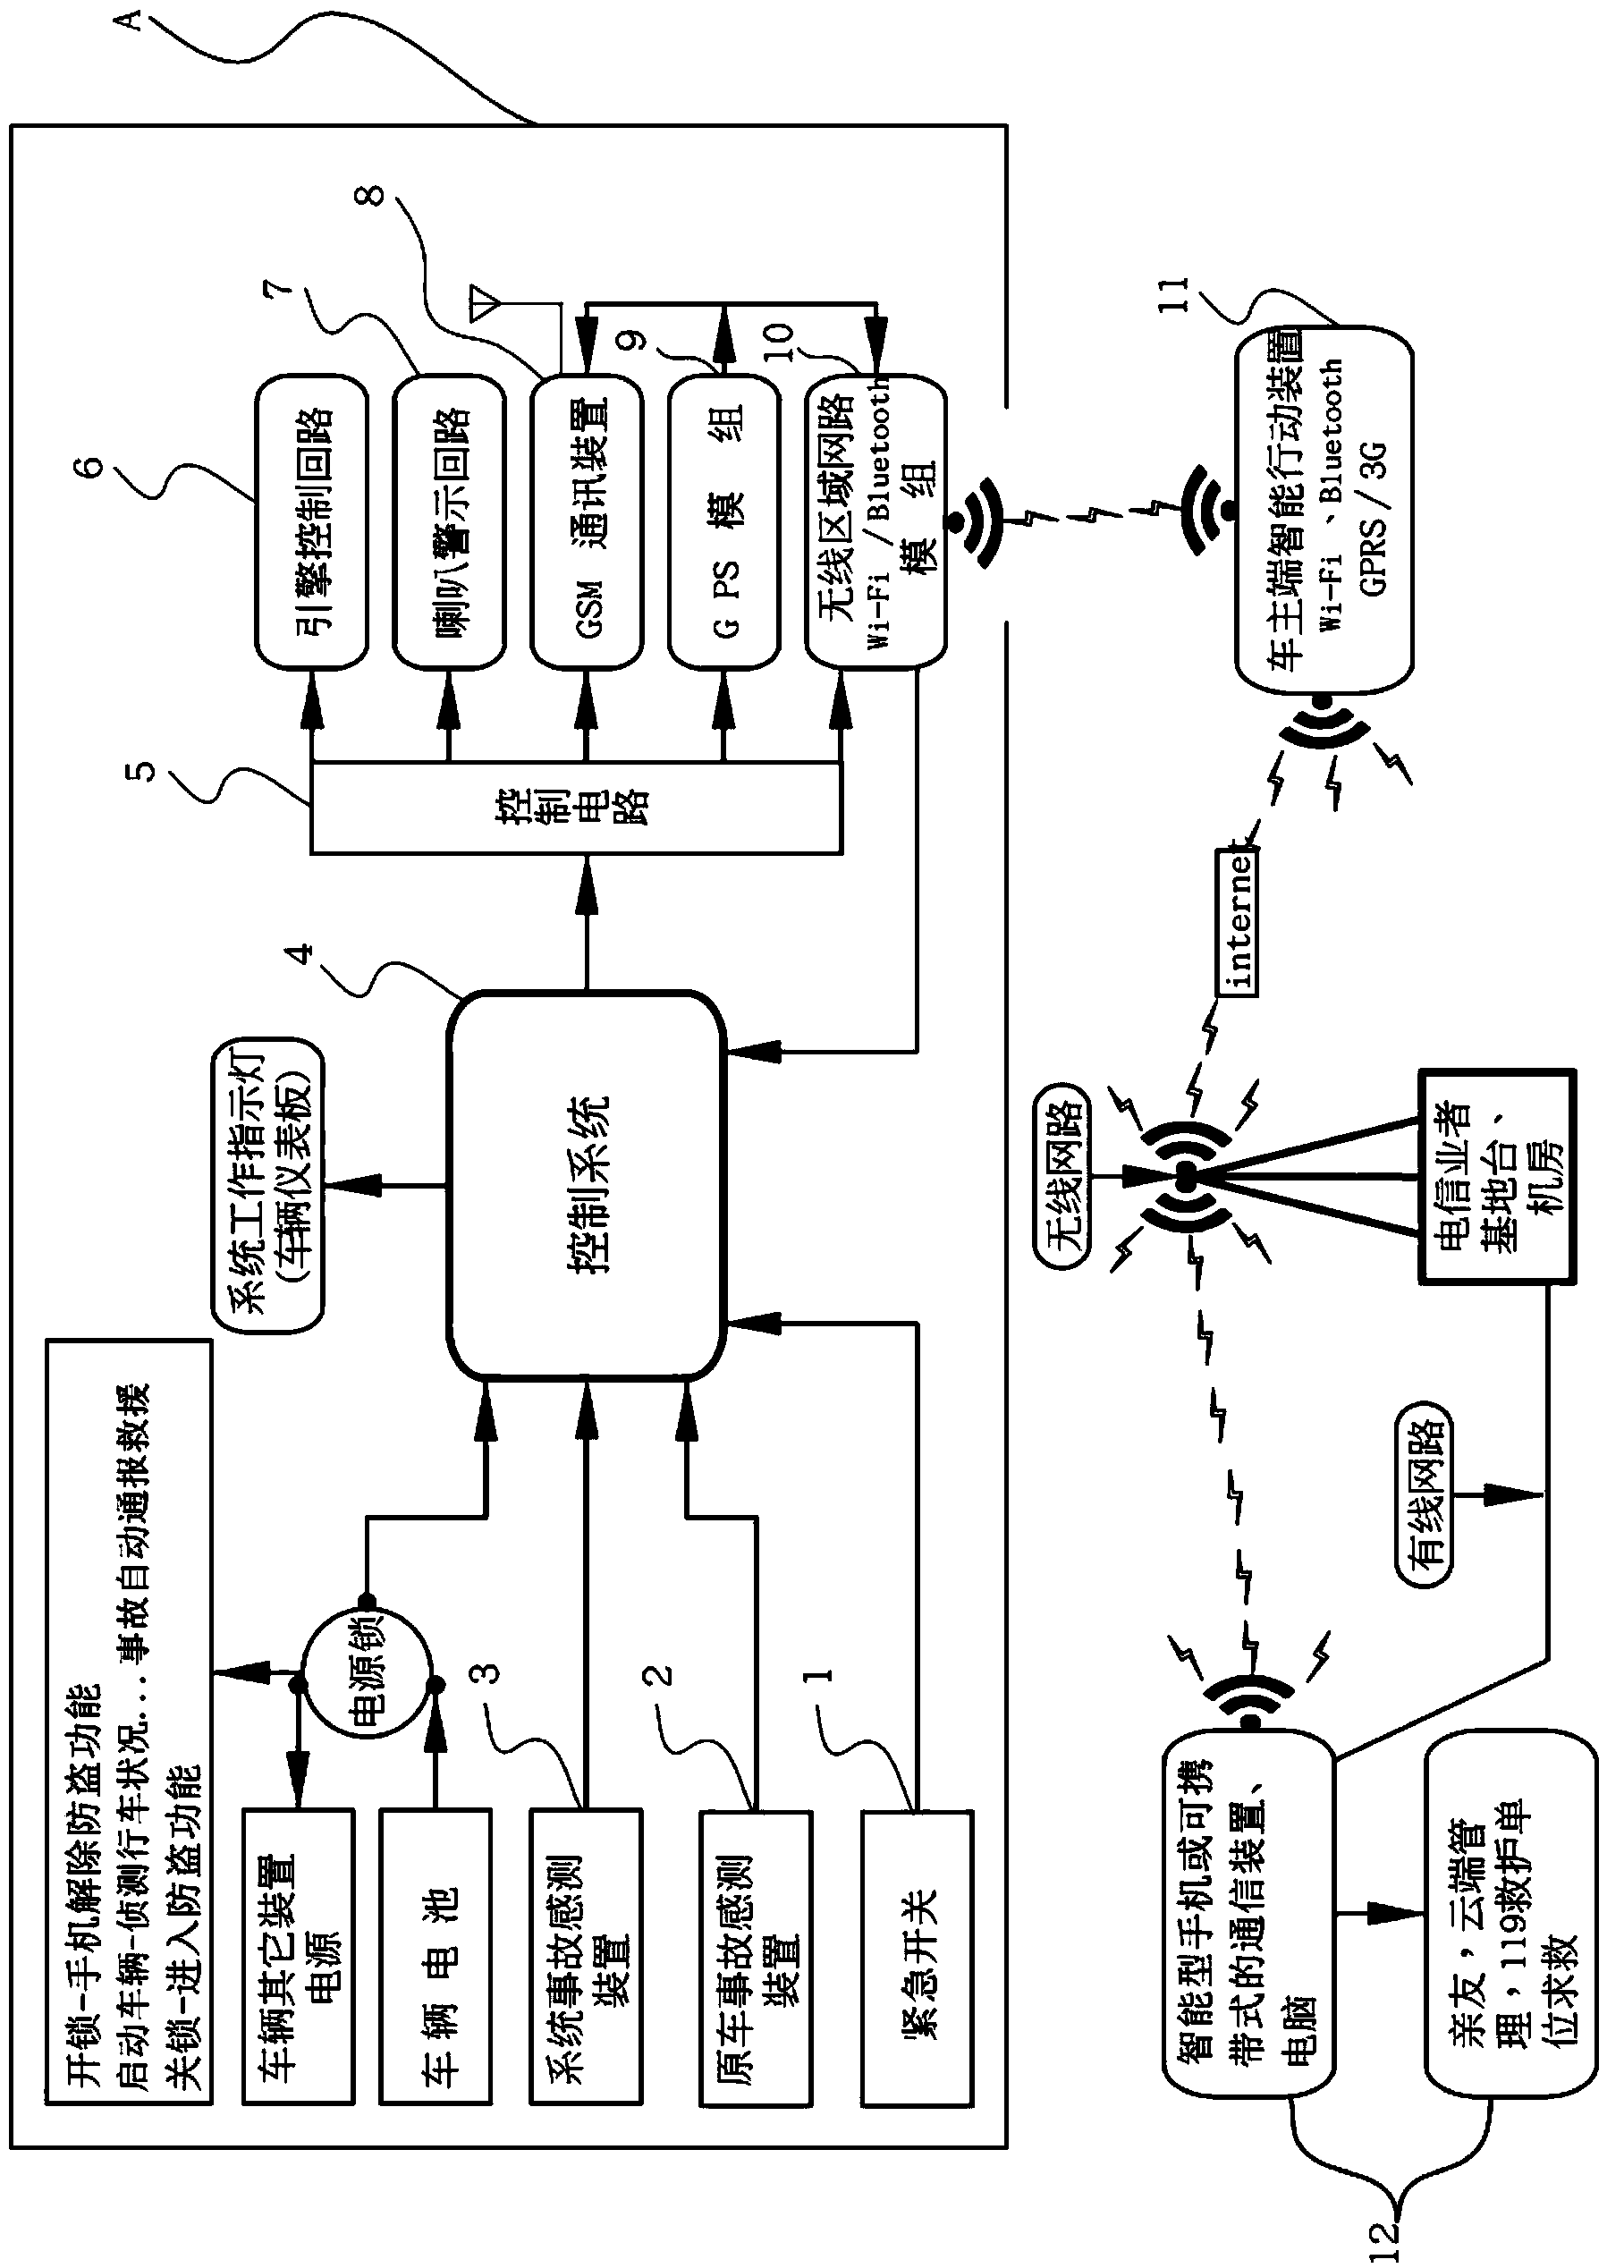 Vehicle safety automatic notification system including anti-theft device